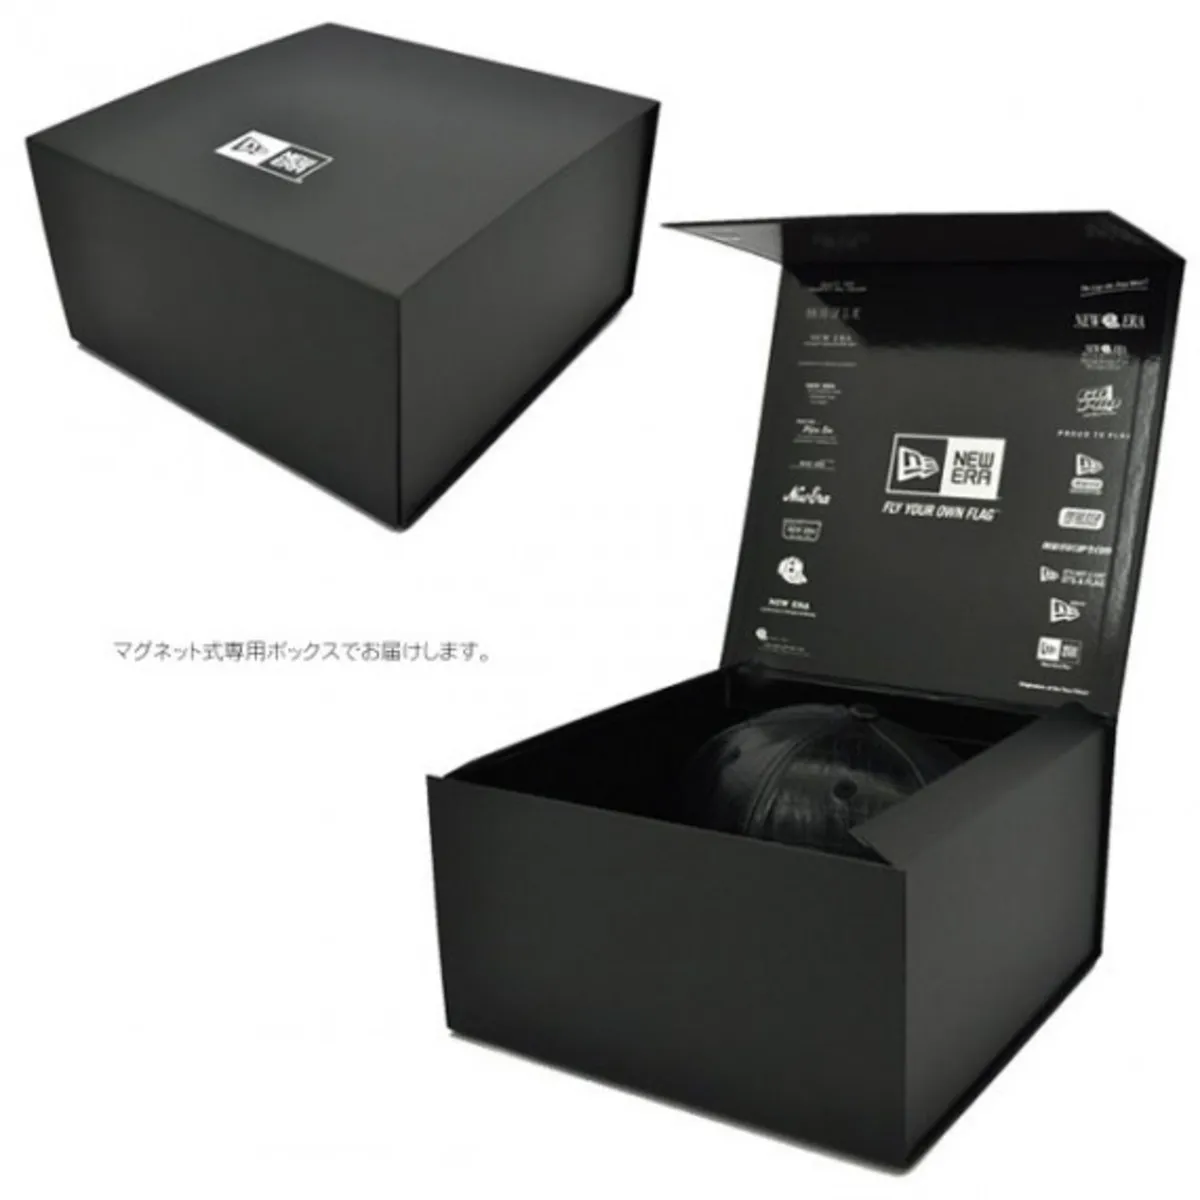 Premium Hat Packaging Boxes for Style and Protection